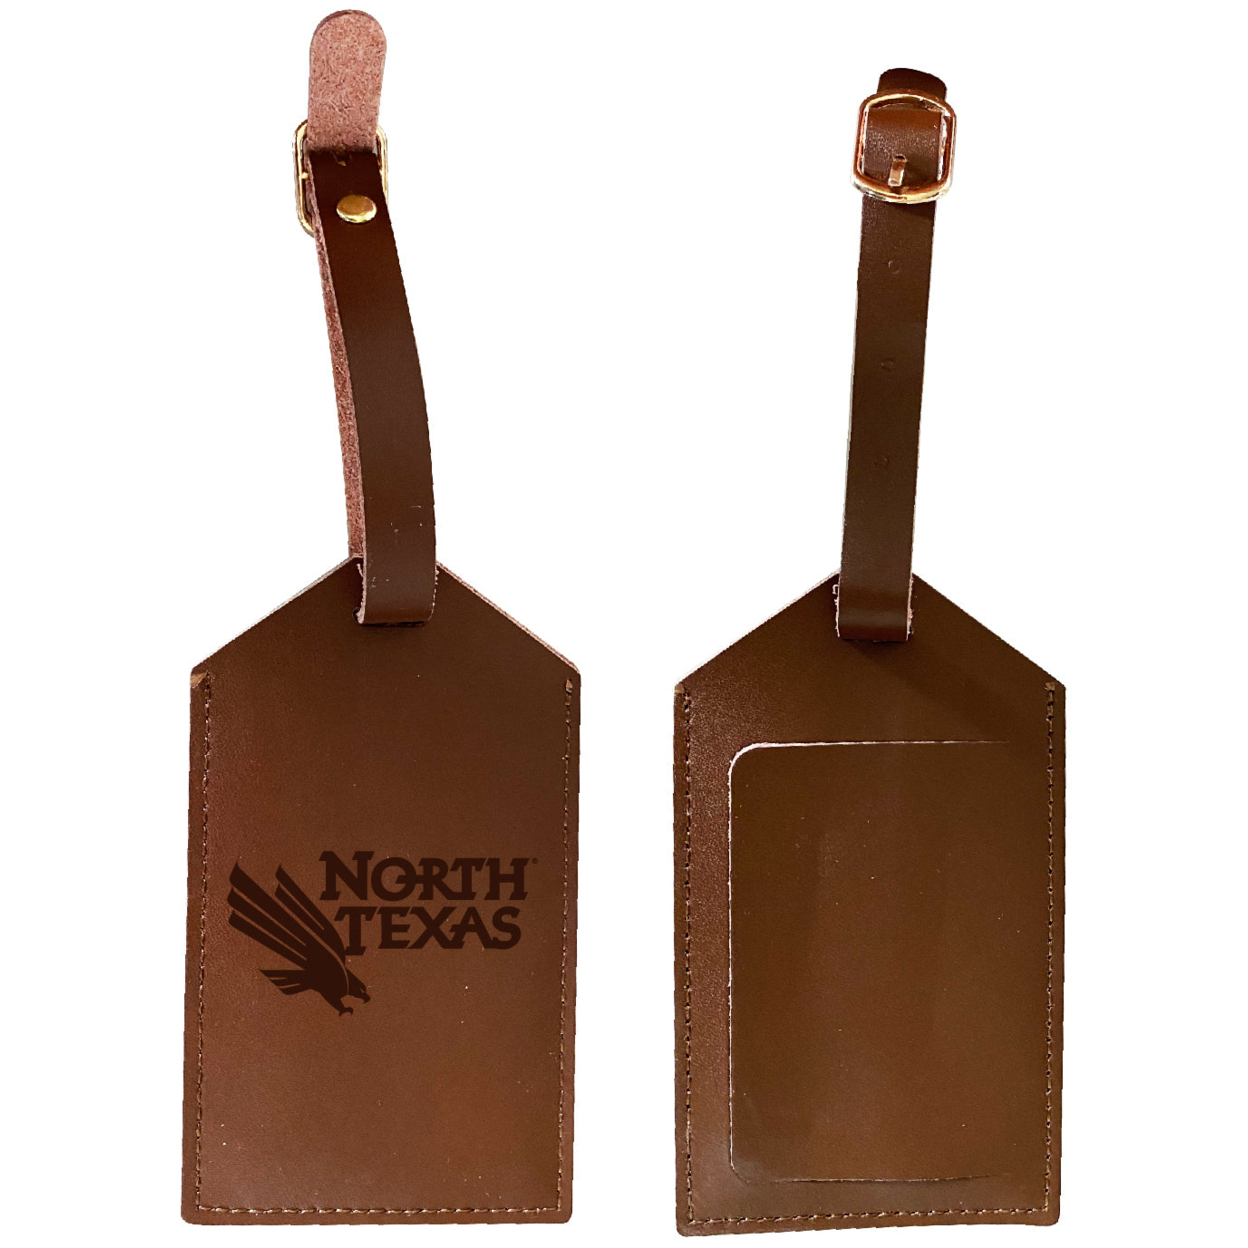 North Texas Leather Luggage Tag Engraved